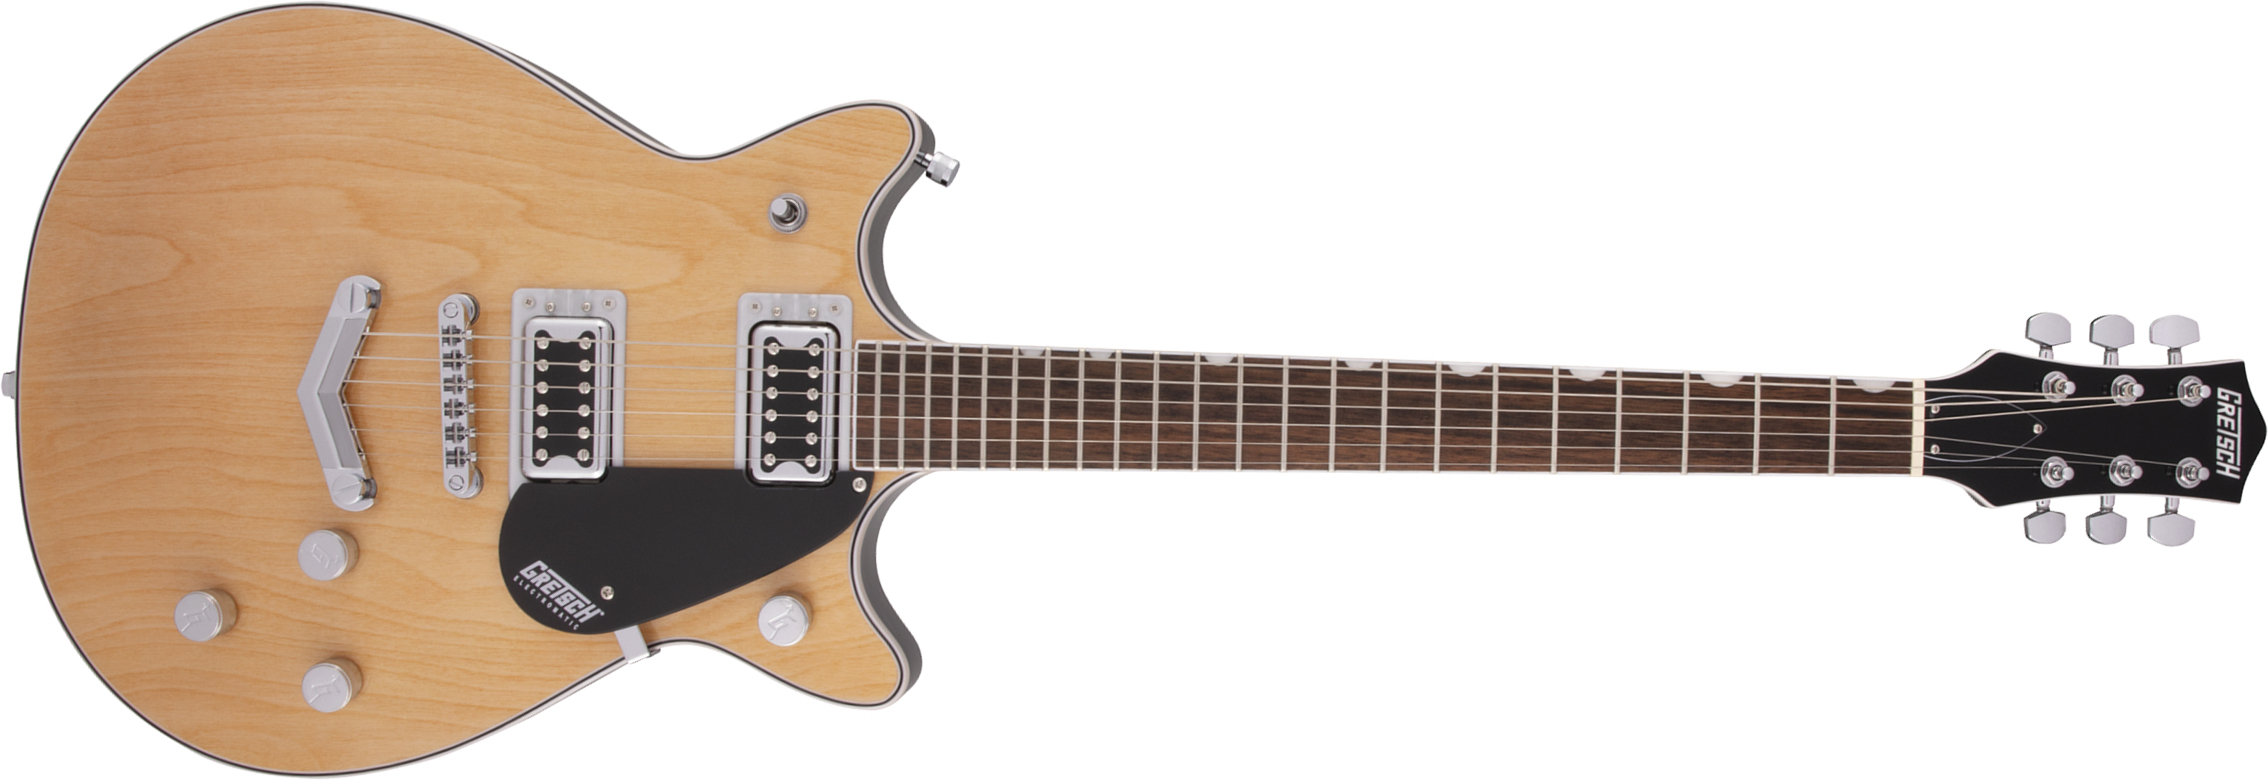 Gretsch G5222 Electromatic Double Jet Bt V-stoptail Hh Ht Lau - Aged Natural - Double cut electric guitar - Main picture